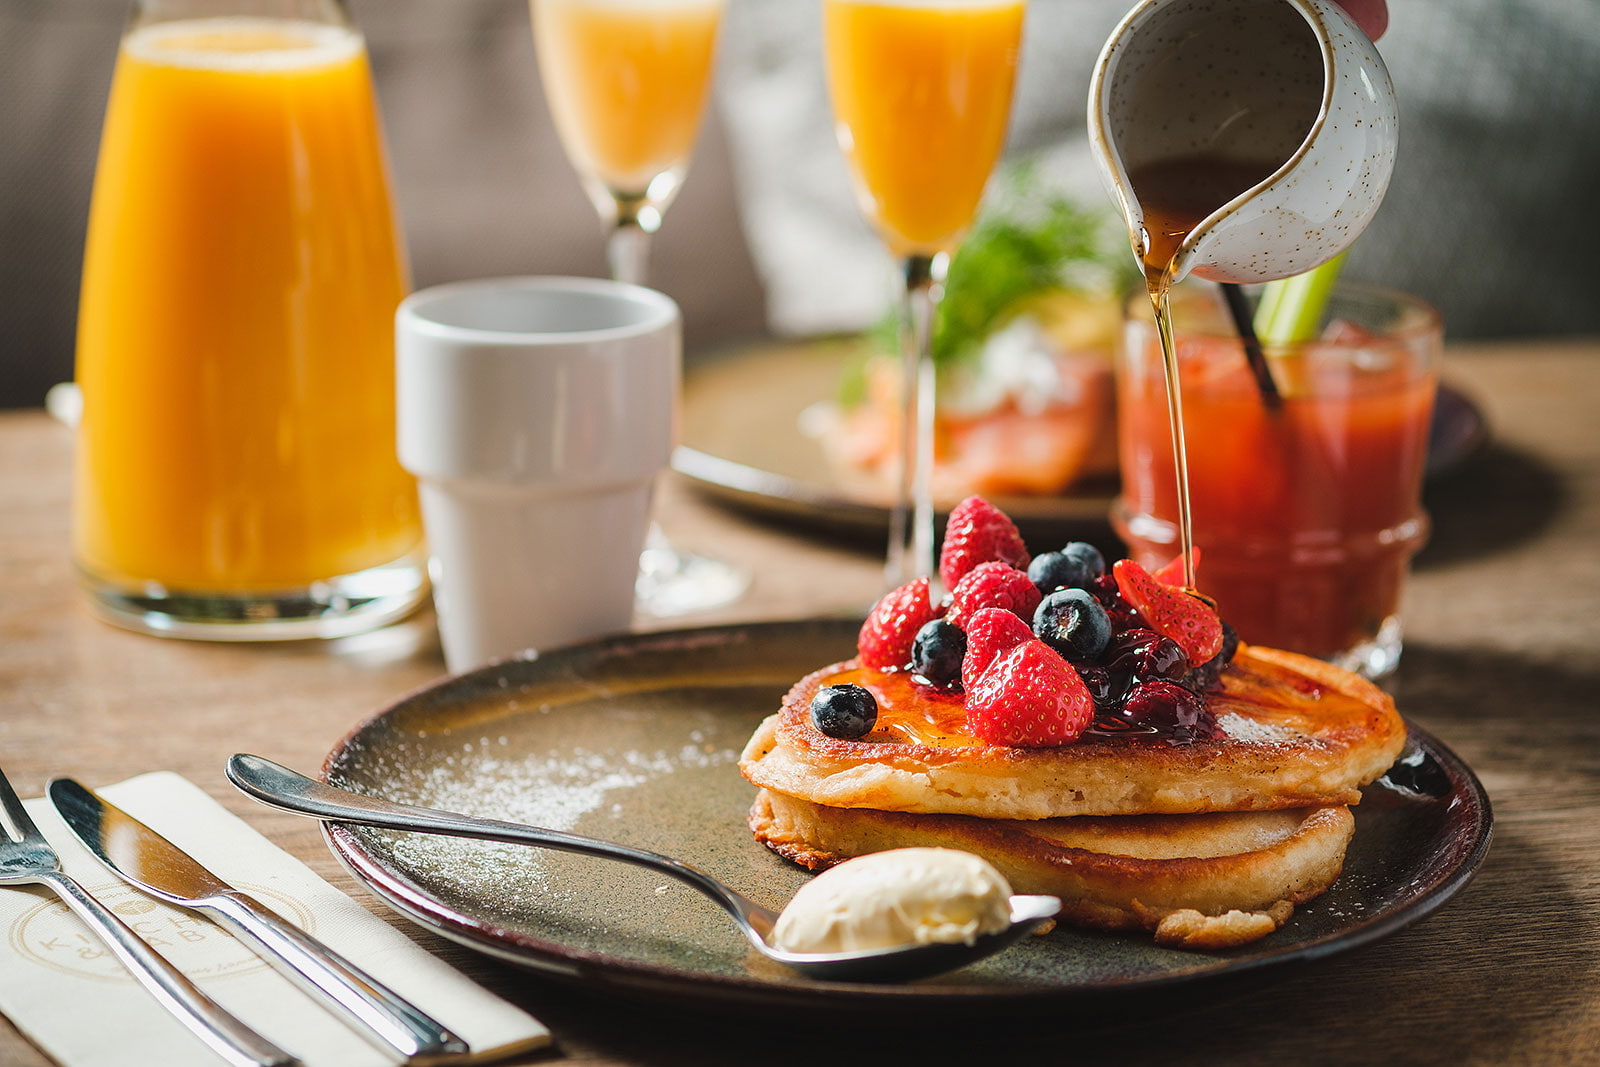 Guide to brunch in Notting Hill